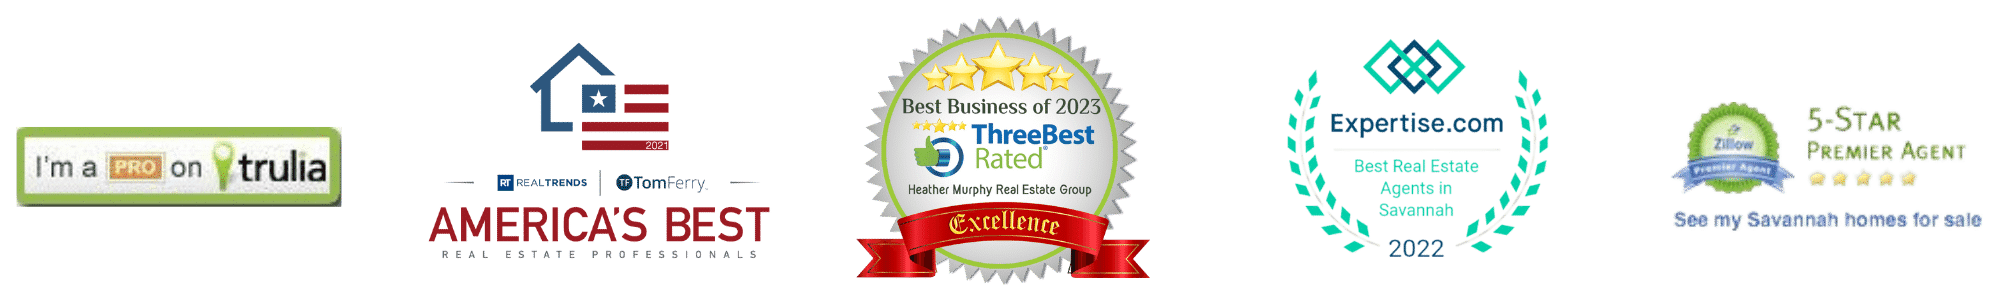 Heather Murphy Real Estate Group Awards for 2023